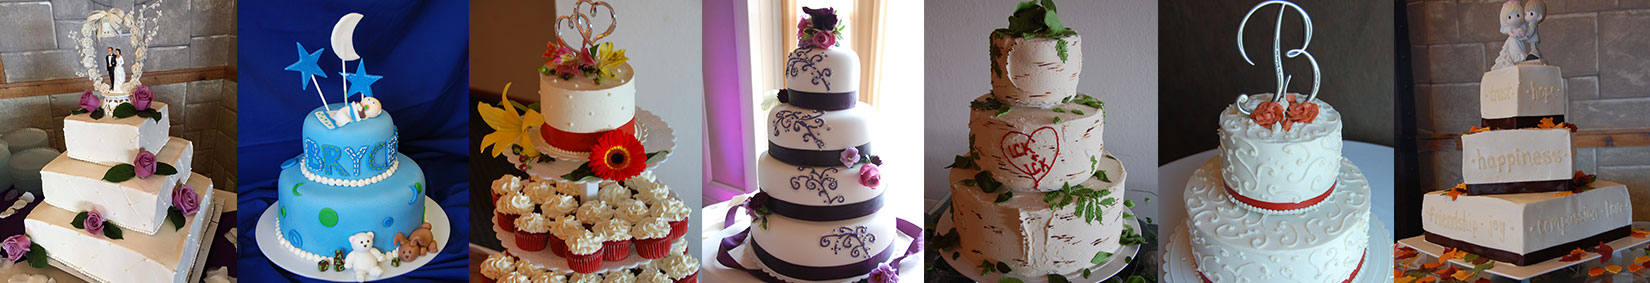 Wedding and Specialty Cakes